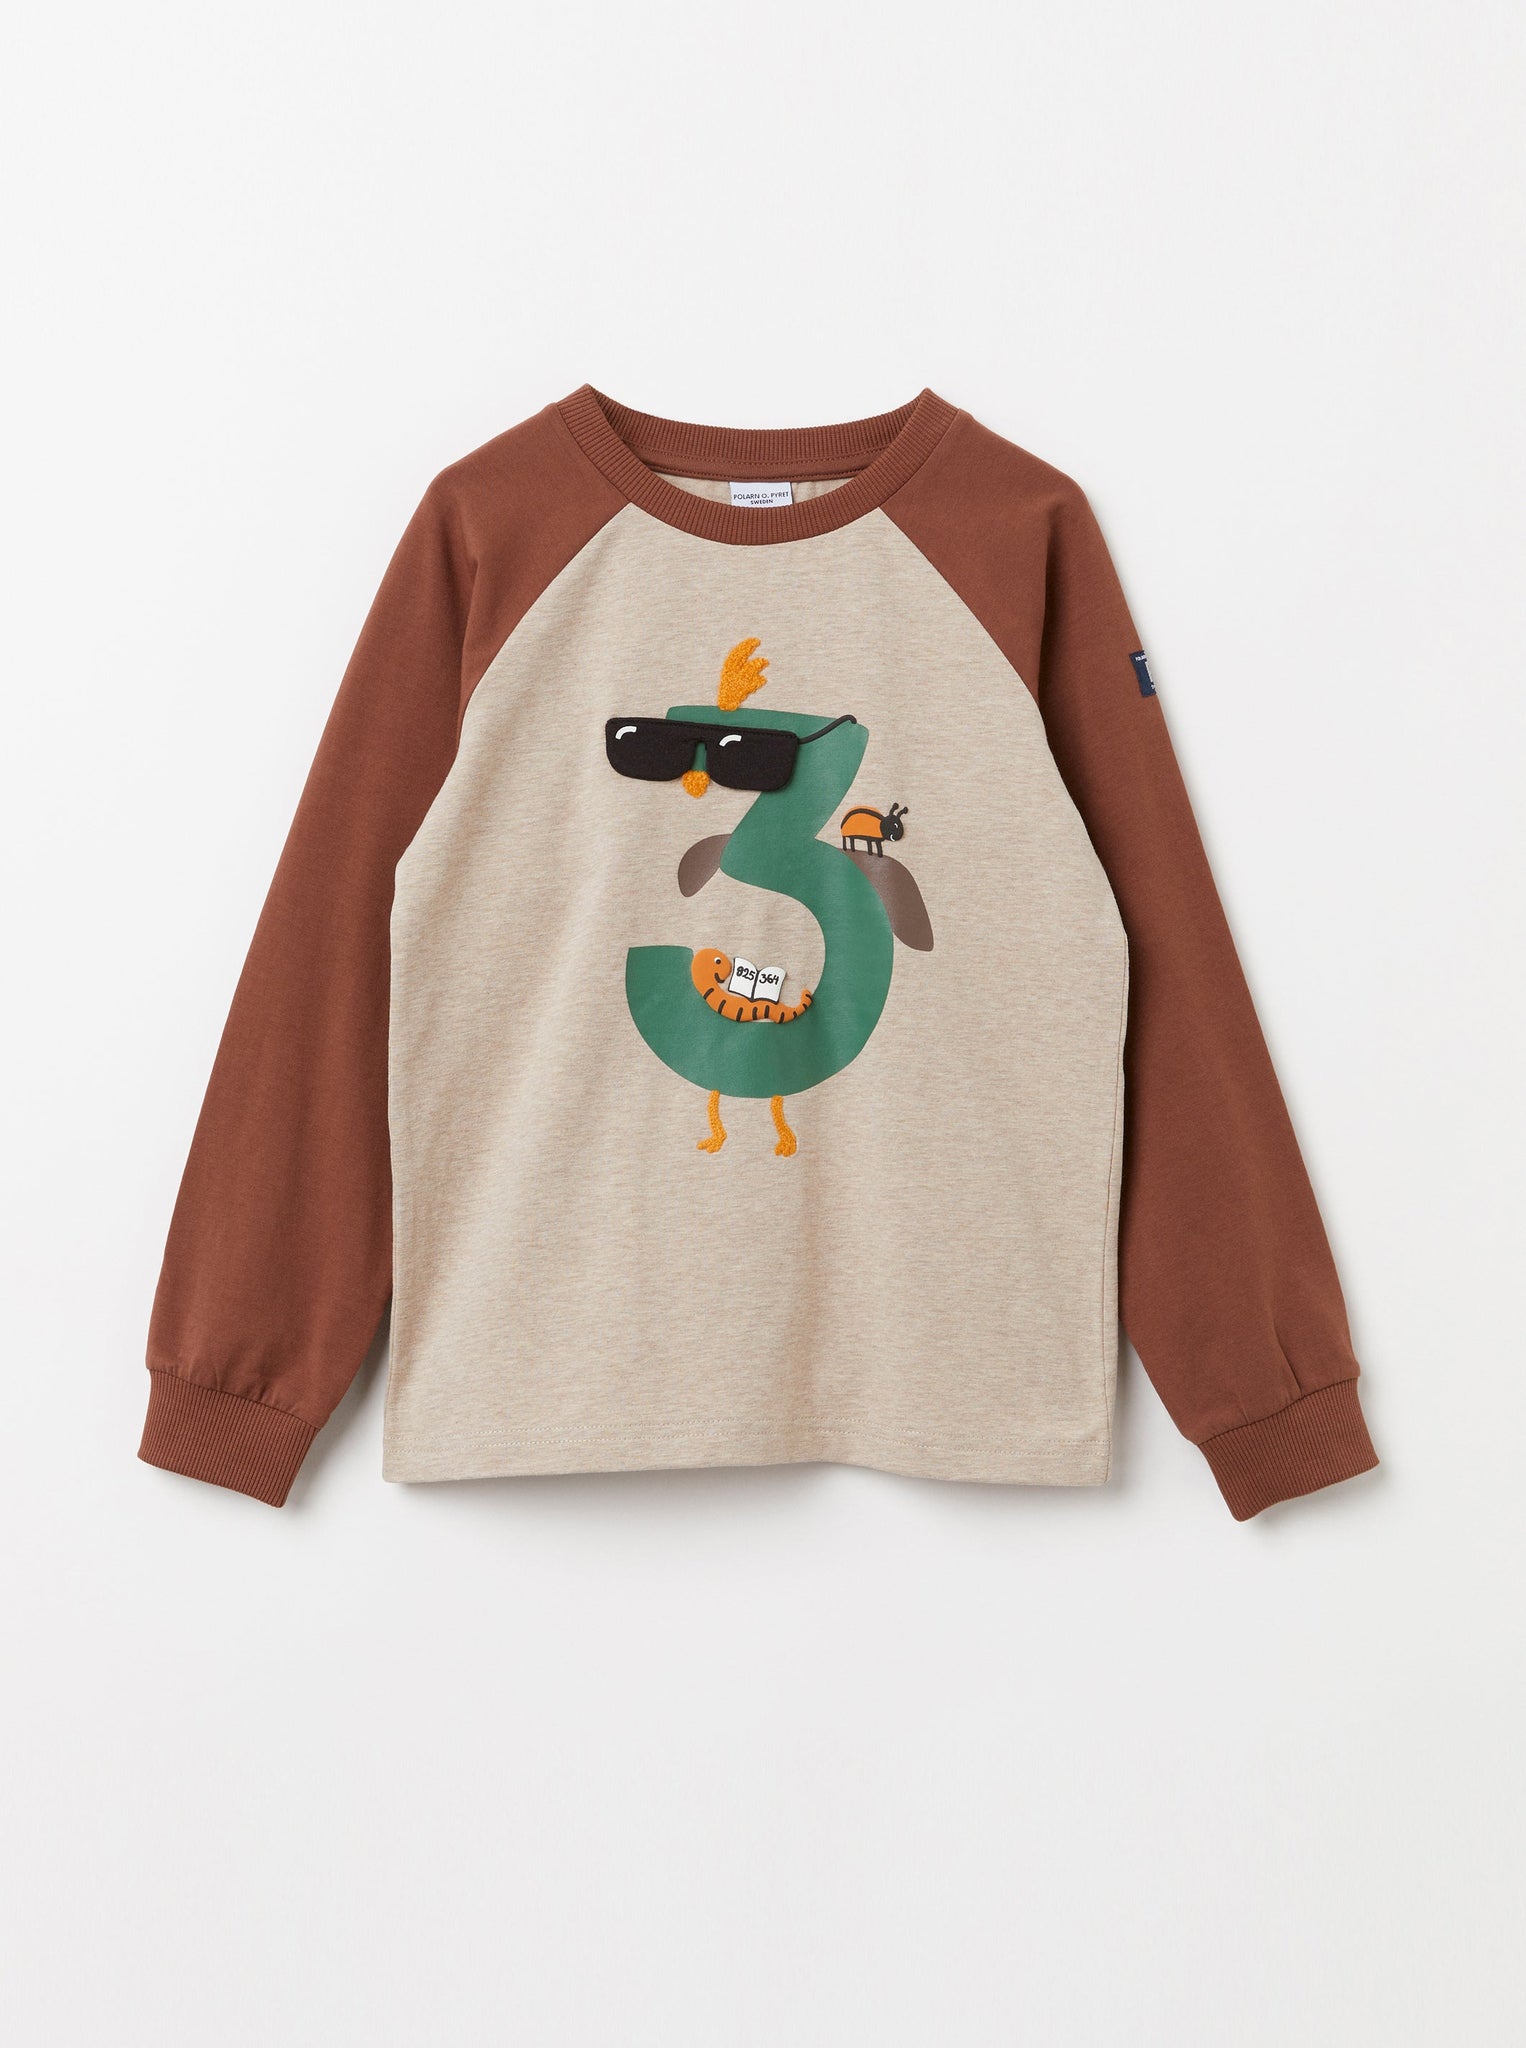 Organic Cotton Number 3 Print Kids Top from the Polarn O. Pyret Kidswear collection. Clothes made using sustainably sourced materials.